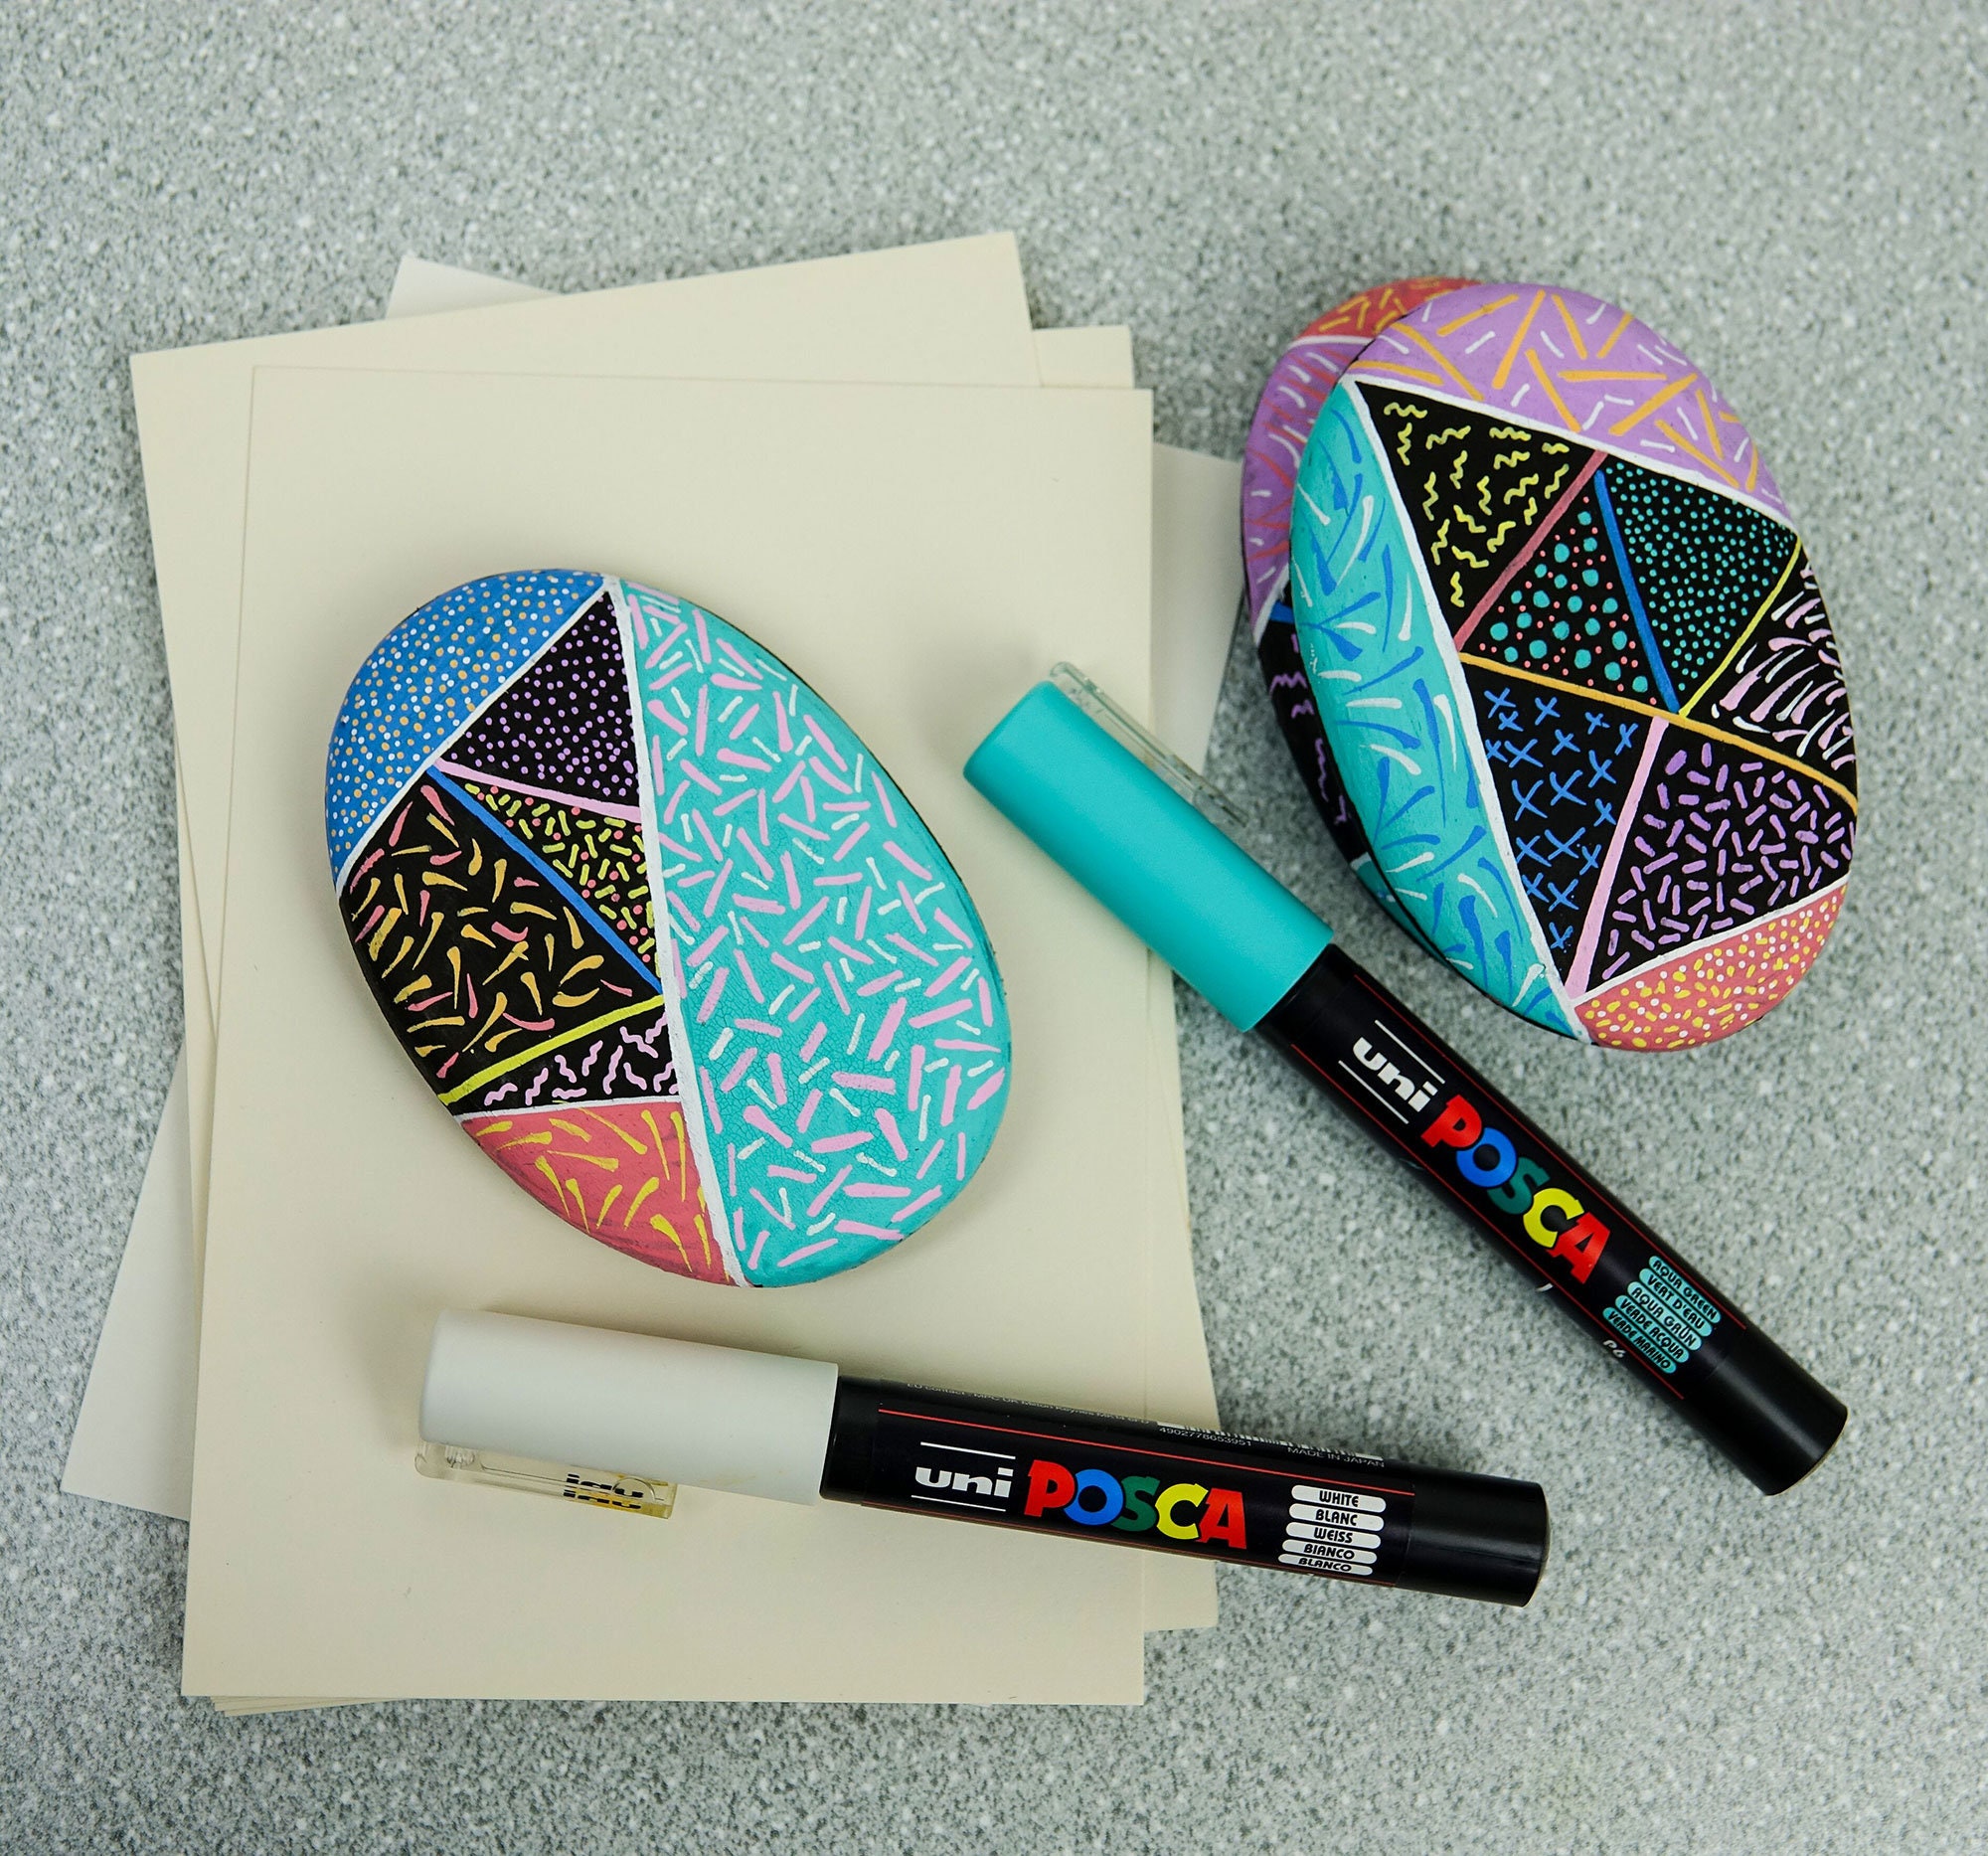 The Posca Marker Is The Perfect Pen to Use for Painting on Rocks